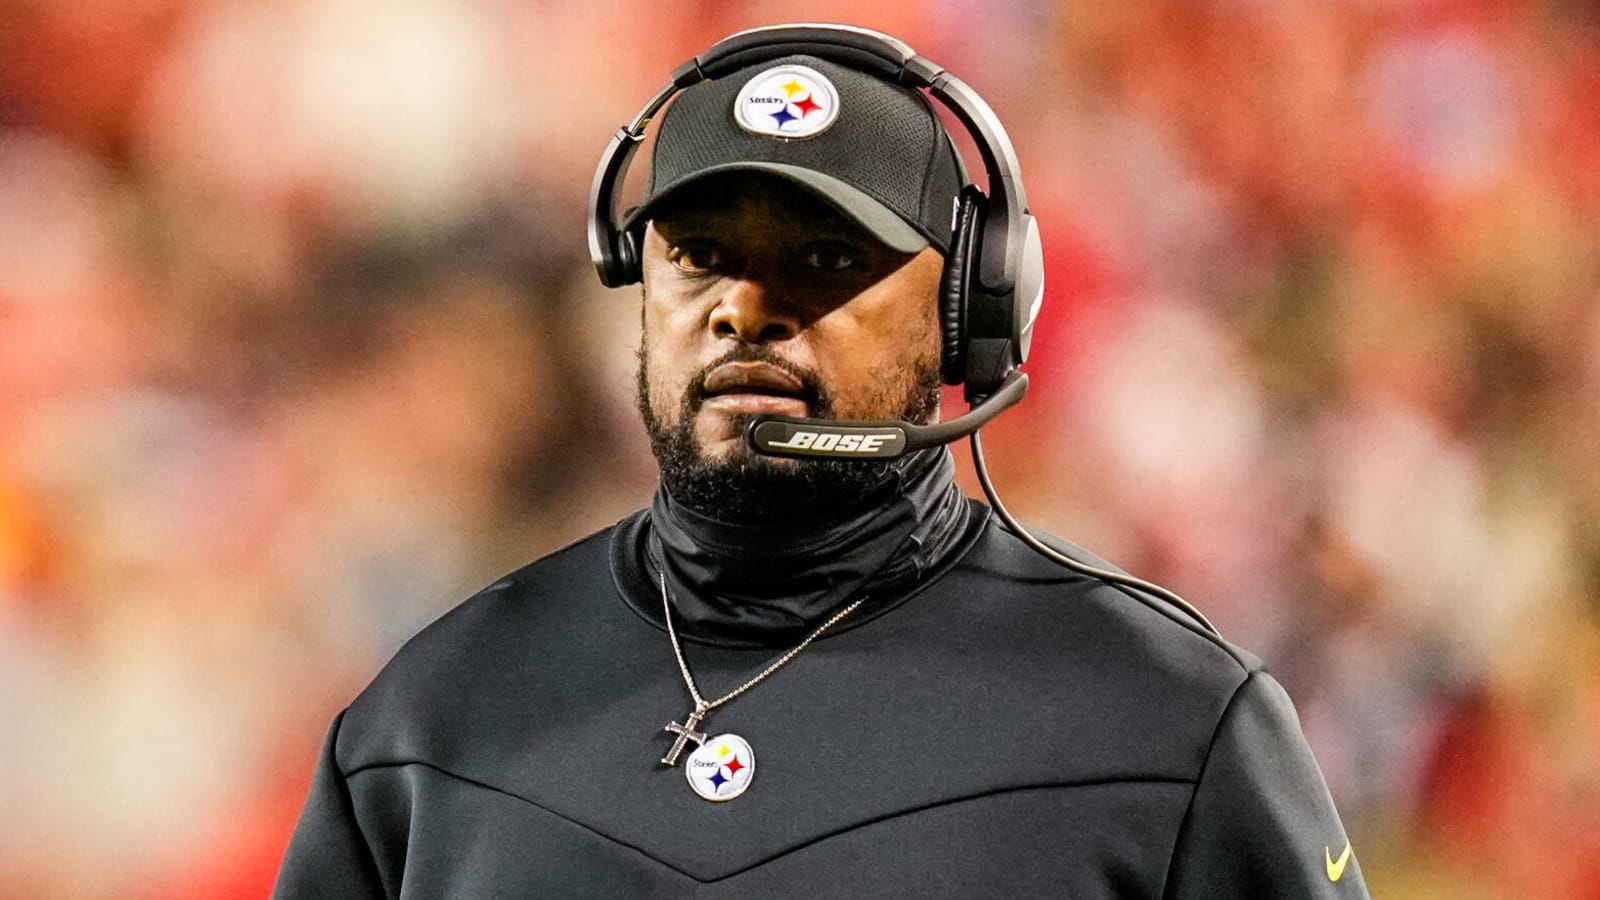 Mike Tomlin: 'Not necessary' for veteran QB to mentor rookie